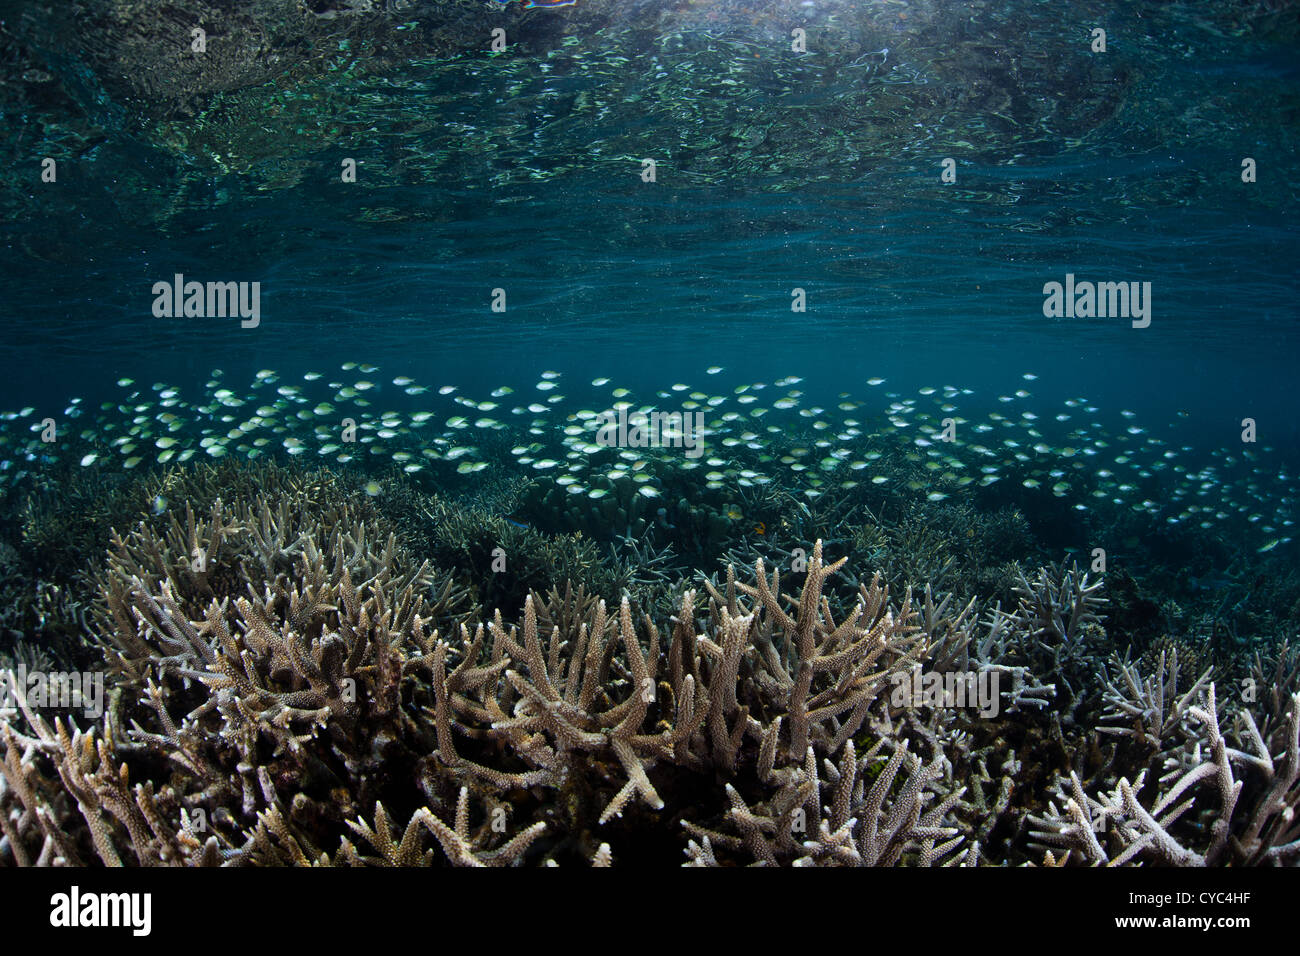 A school of Blue-green damselfish, Chromis viridis, swims over a shallow coral reef made up of mainly Acropora colonies. Stock Photo